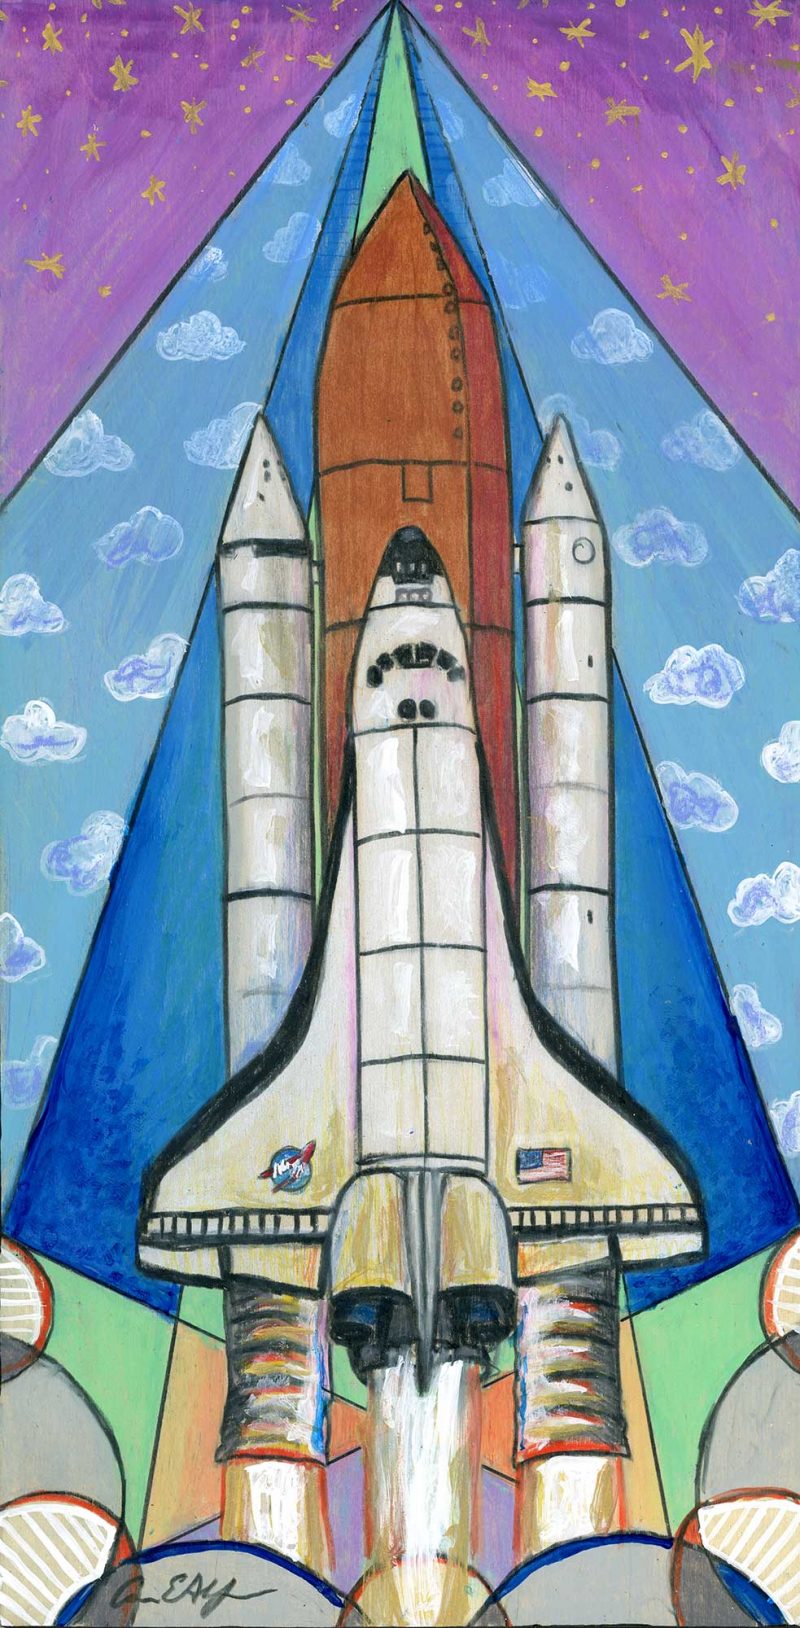 SOLD - "Space Shuttle #1", 6" x 12", mixed media